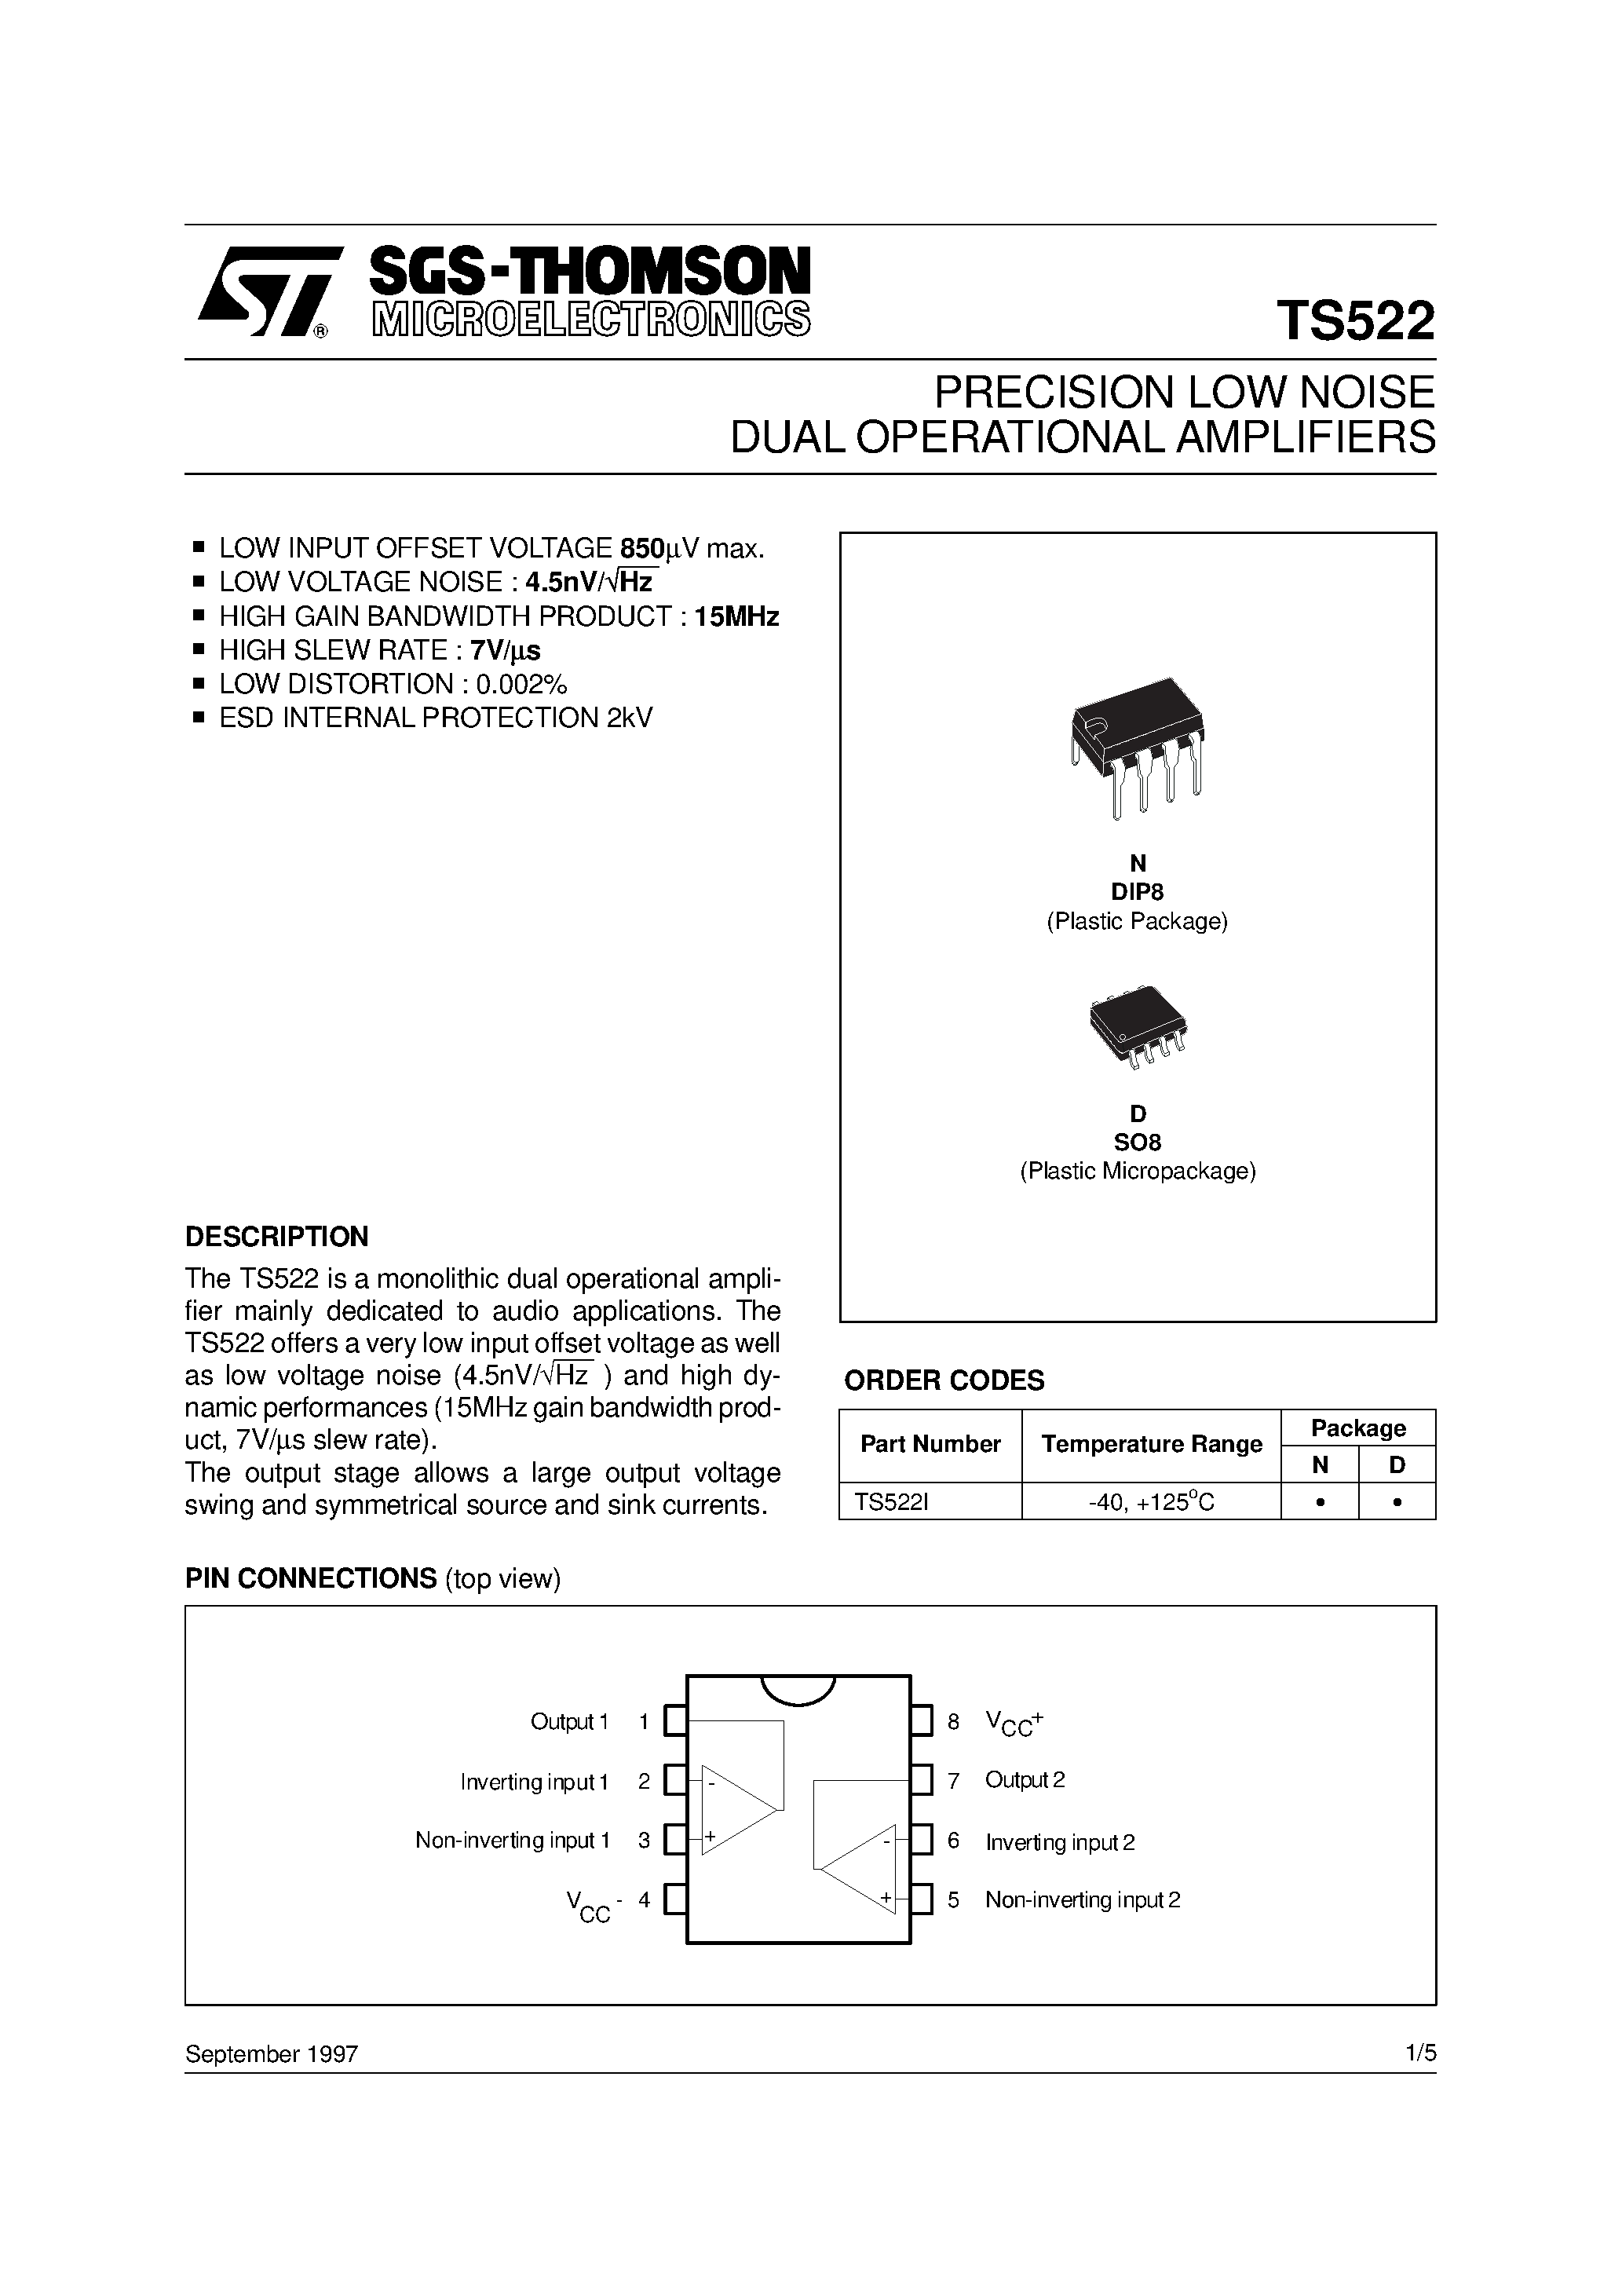 Datasheet TS522D - PRECISION LOW NOISE DUAL OPERATIONAL AMPLIFIERS page 1